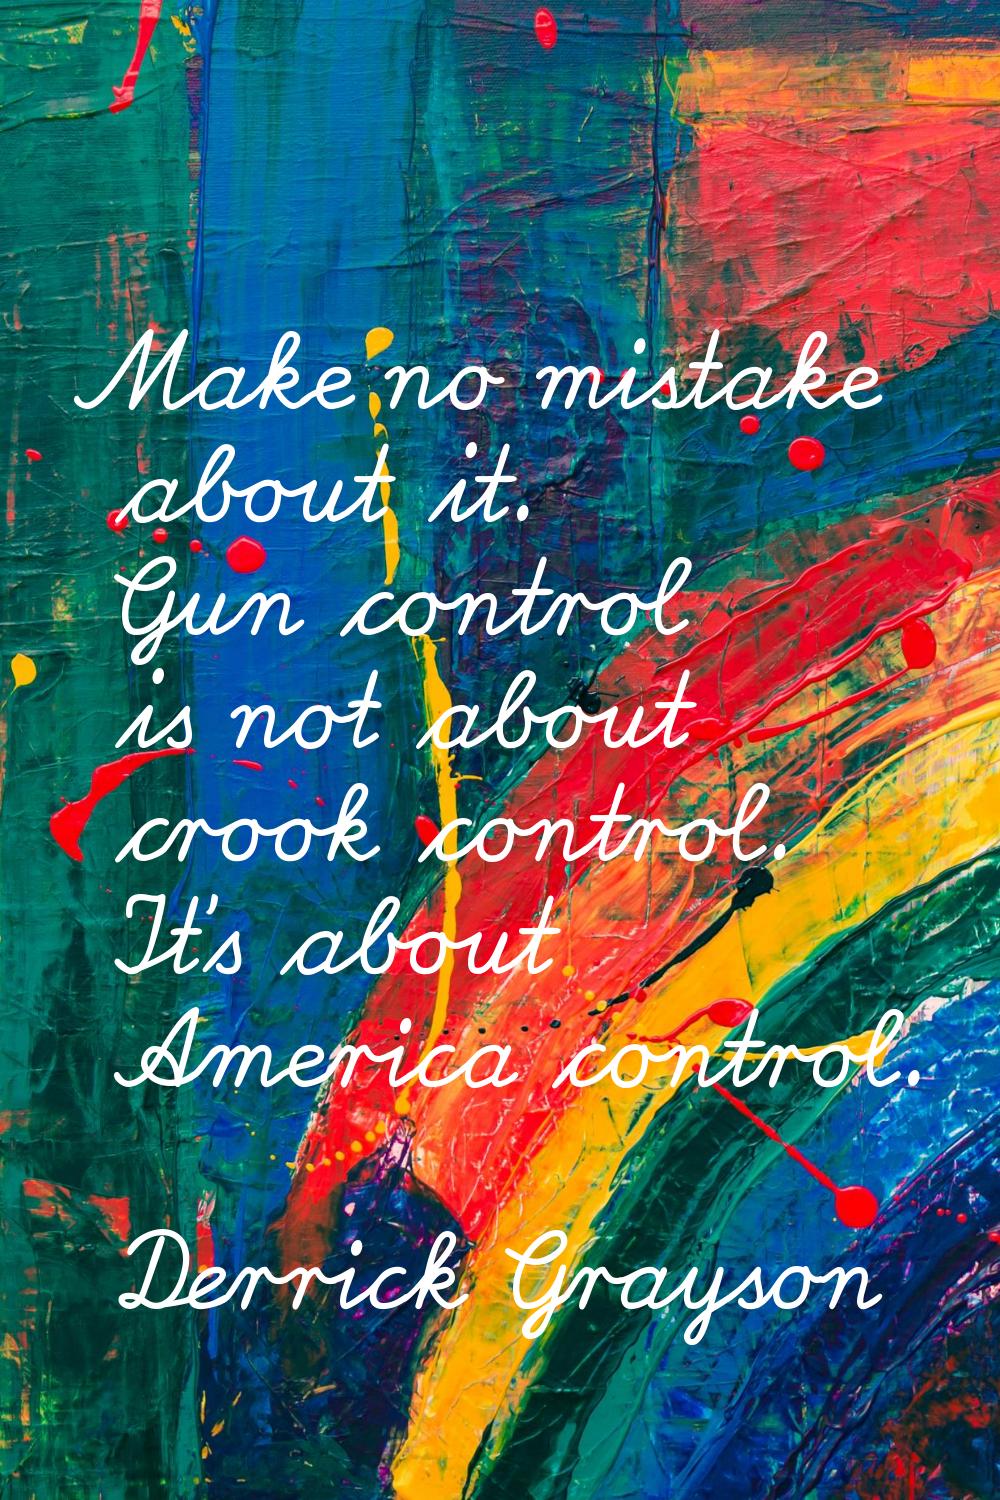 Make no mistake about it. Gun control is not about crook control. It's about America control.